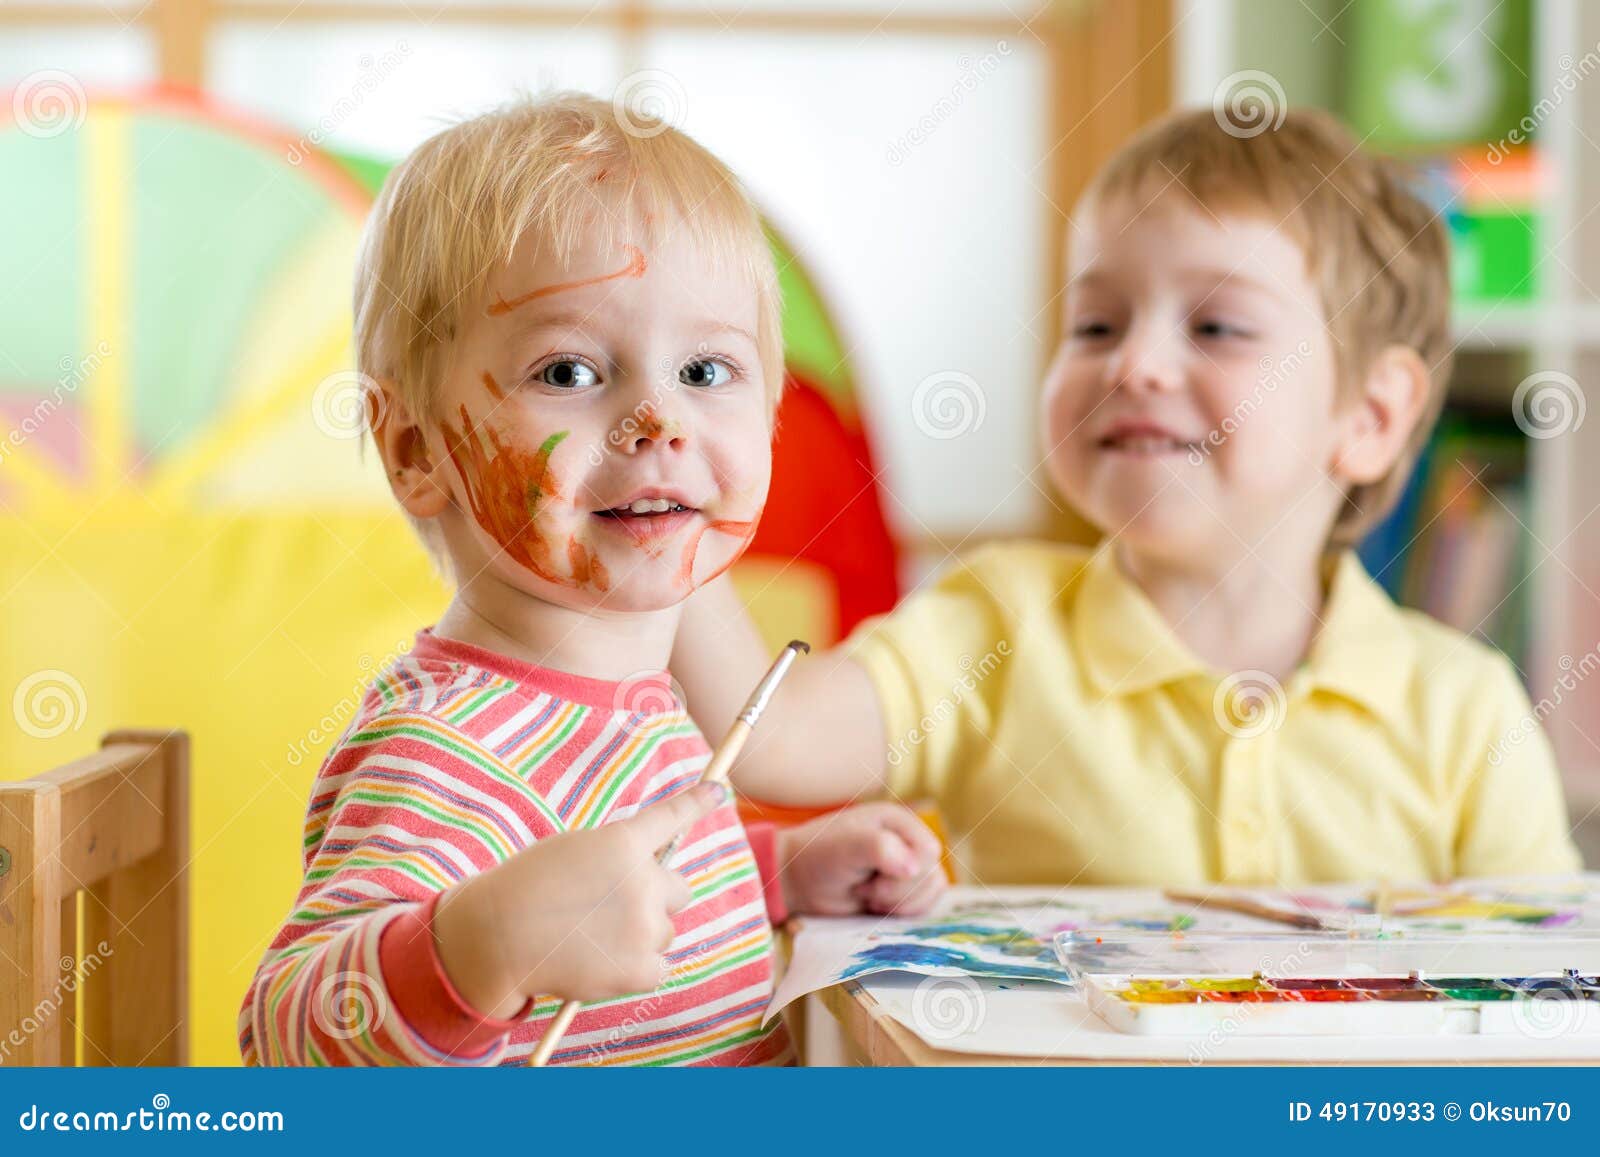 children painting at home or playschool